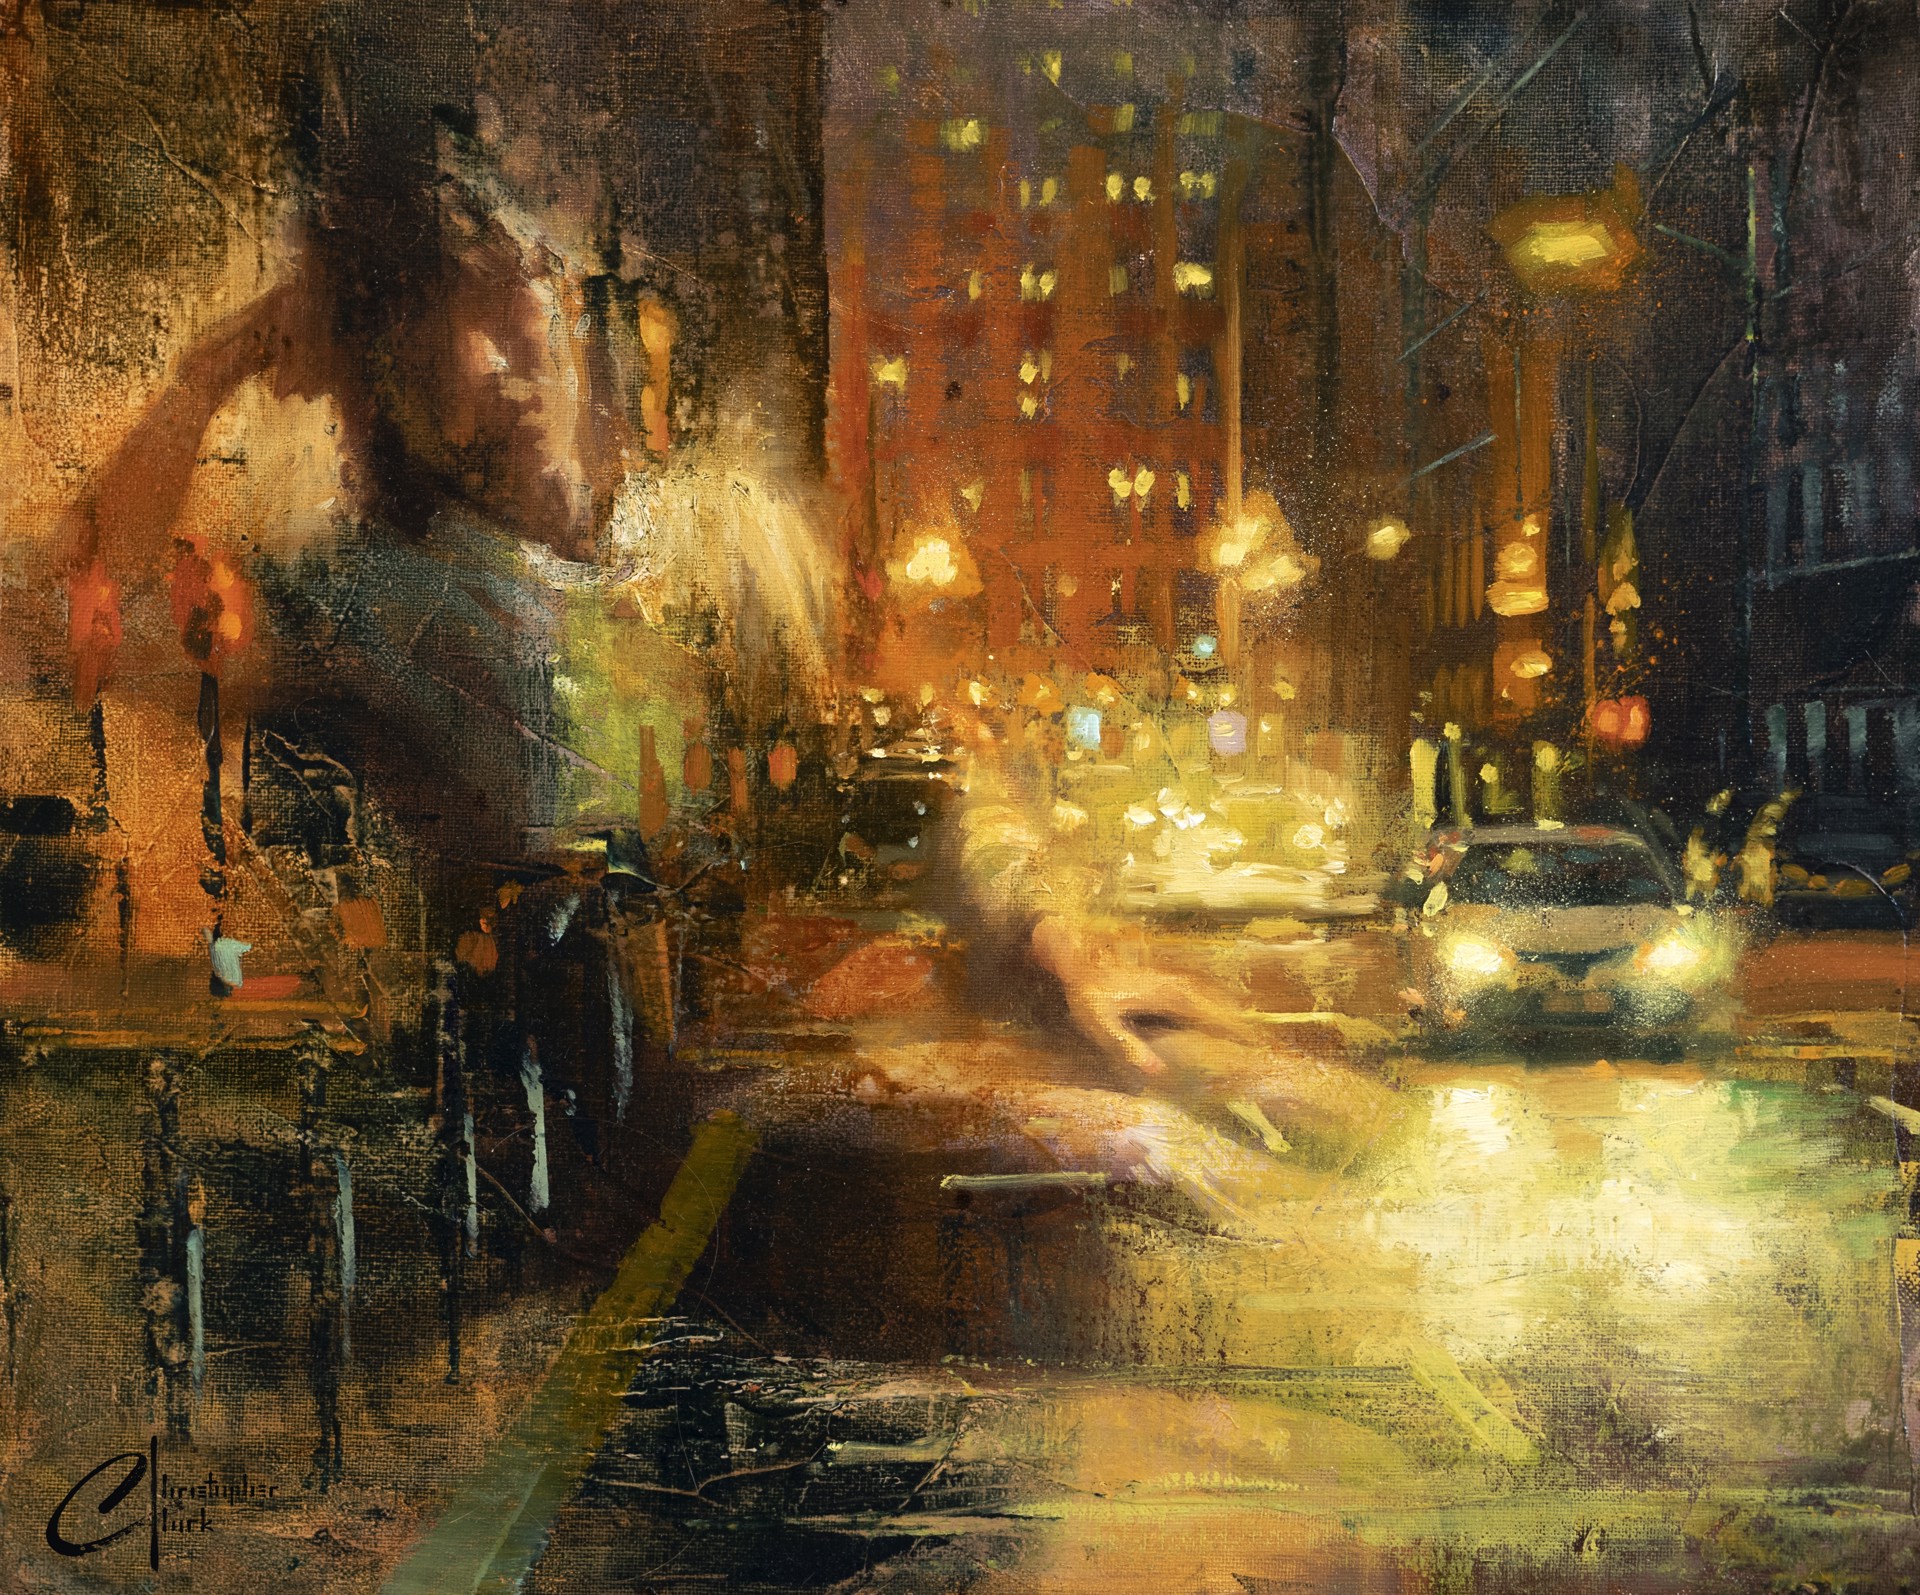 Visions of the Night by Christopher Clark